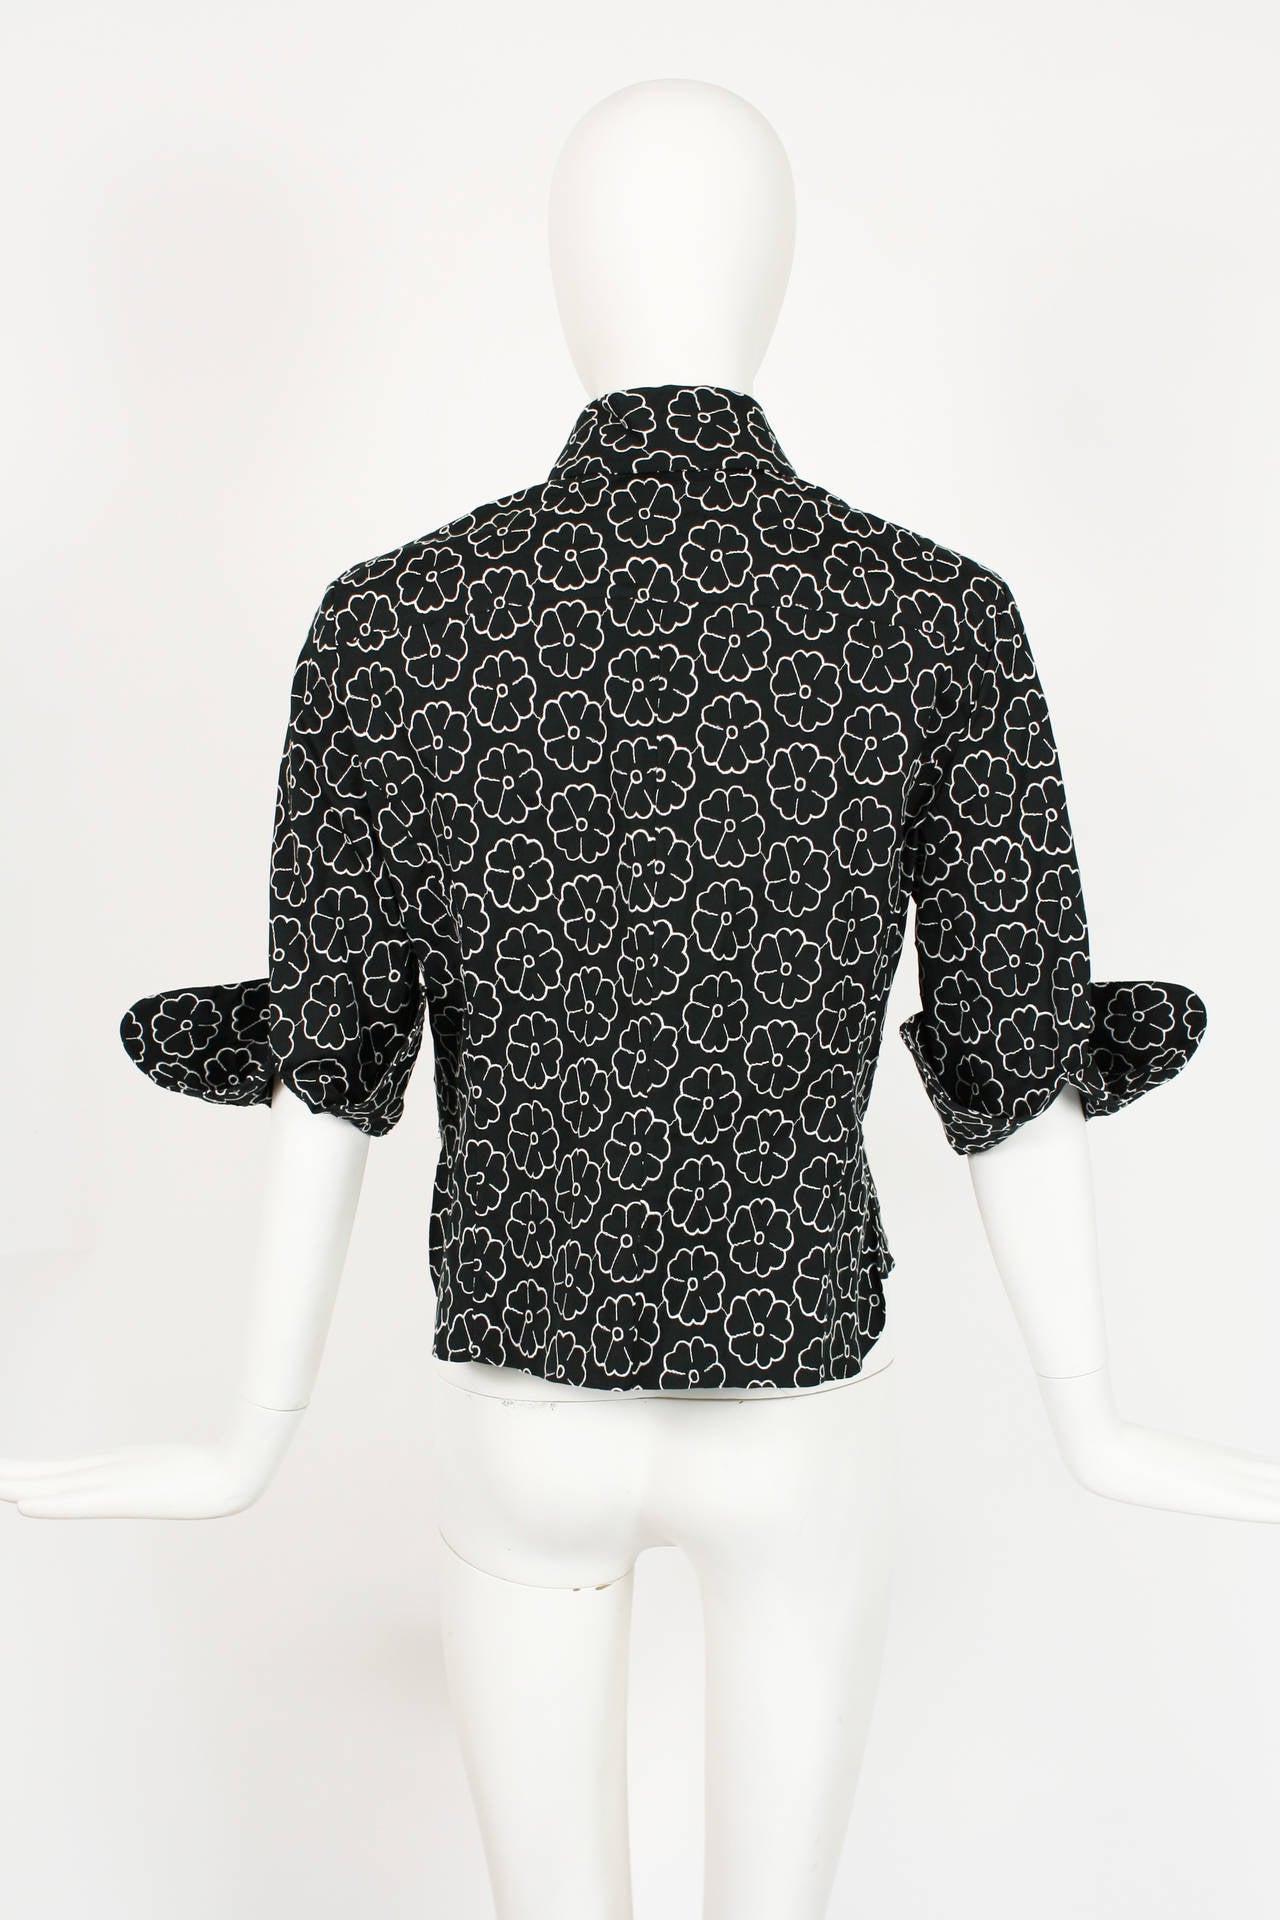 Chanel Black Camelia Embroidred Shirt For Sale 2